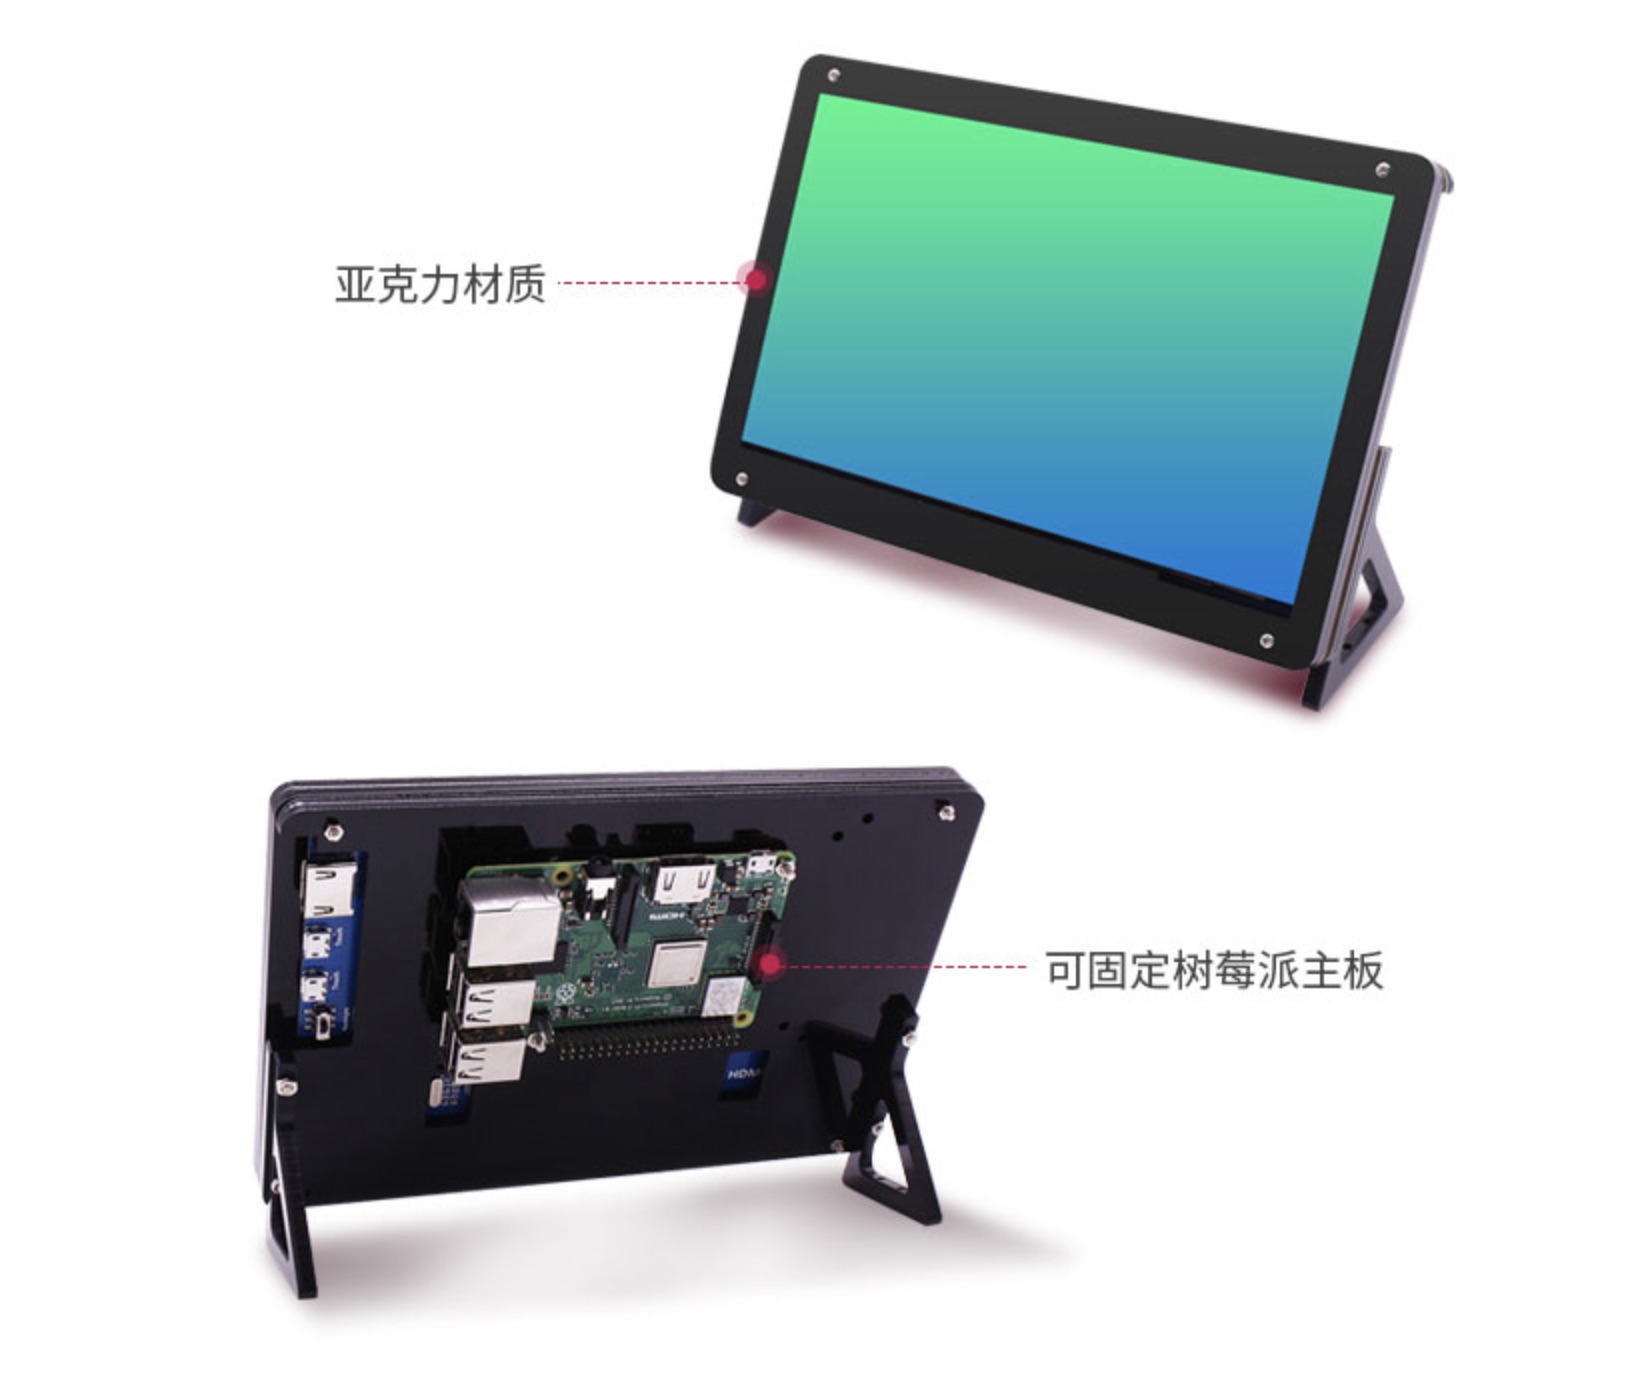 7 Inch Touch Screen Monitor for Raspberry Pi, Portable IPS Display 1024 * 600 HDMI Touchscreen with Case